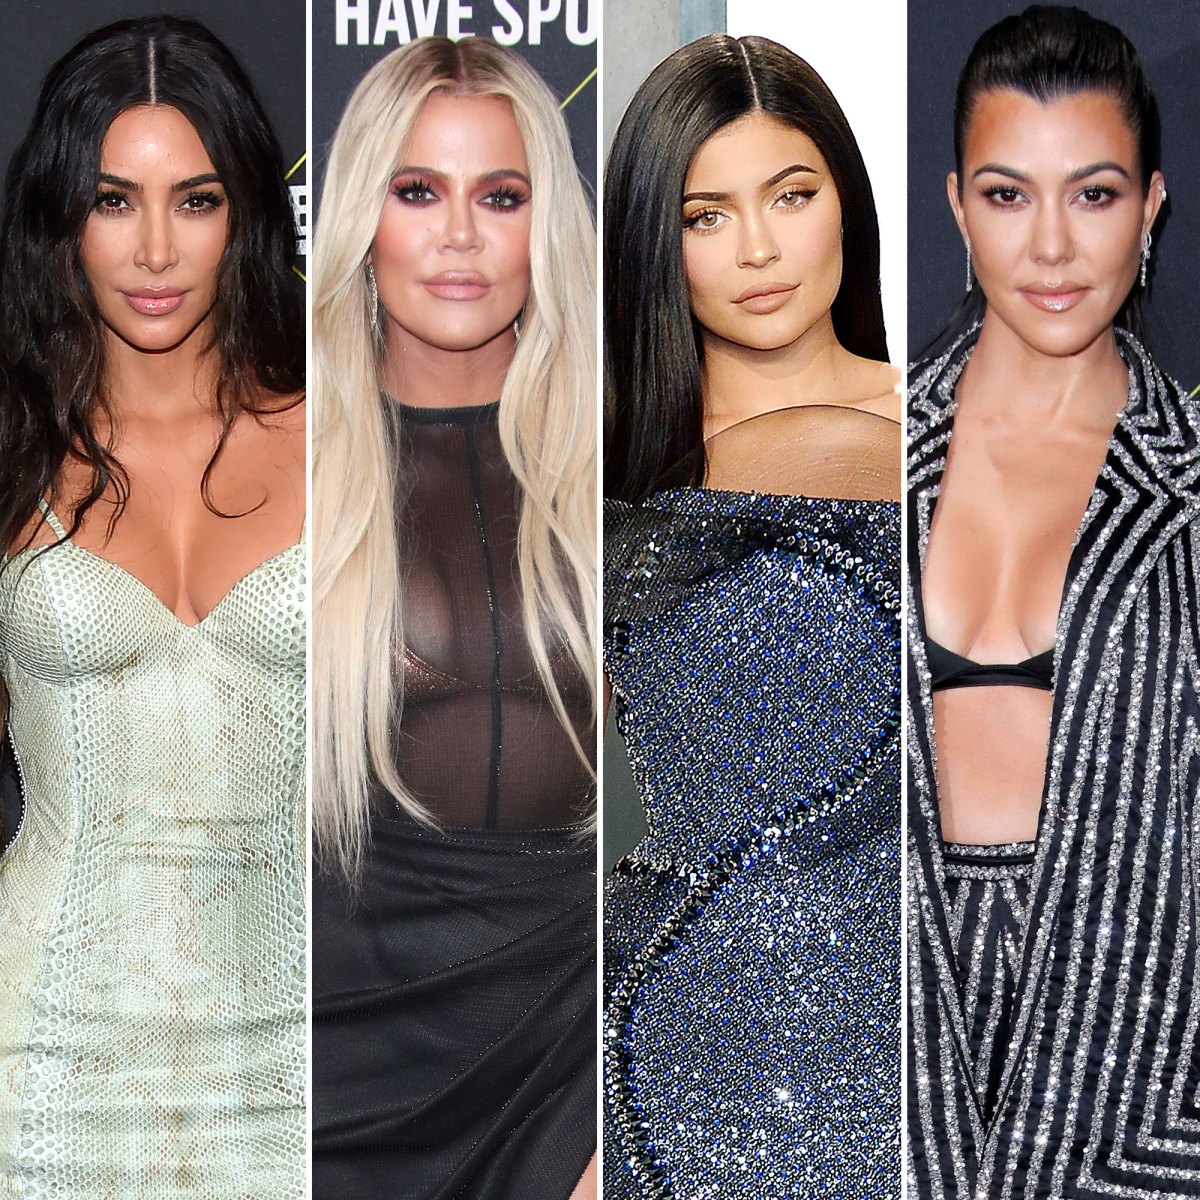 Jb Sister Captions Porn - Kardashian-Jenner Sisters' Best Parenting Clapbacks Over the Years